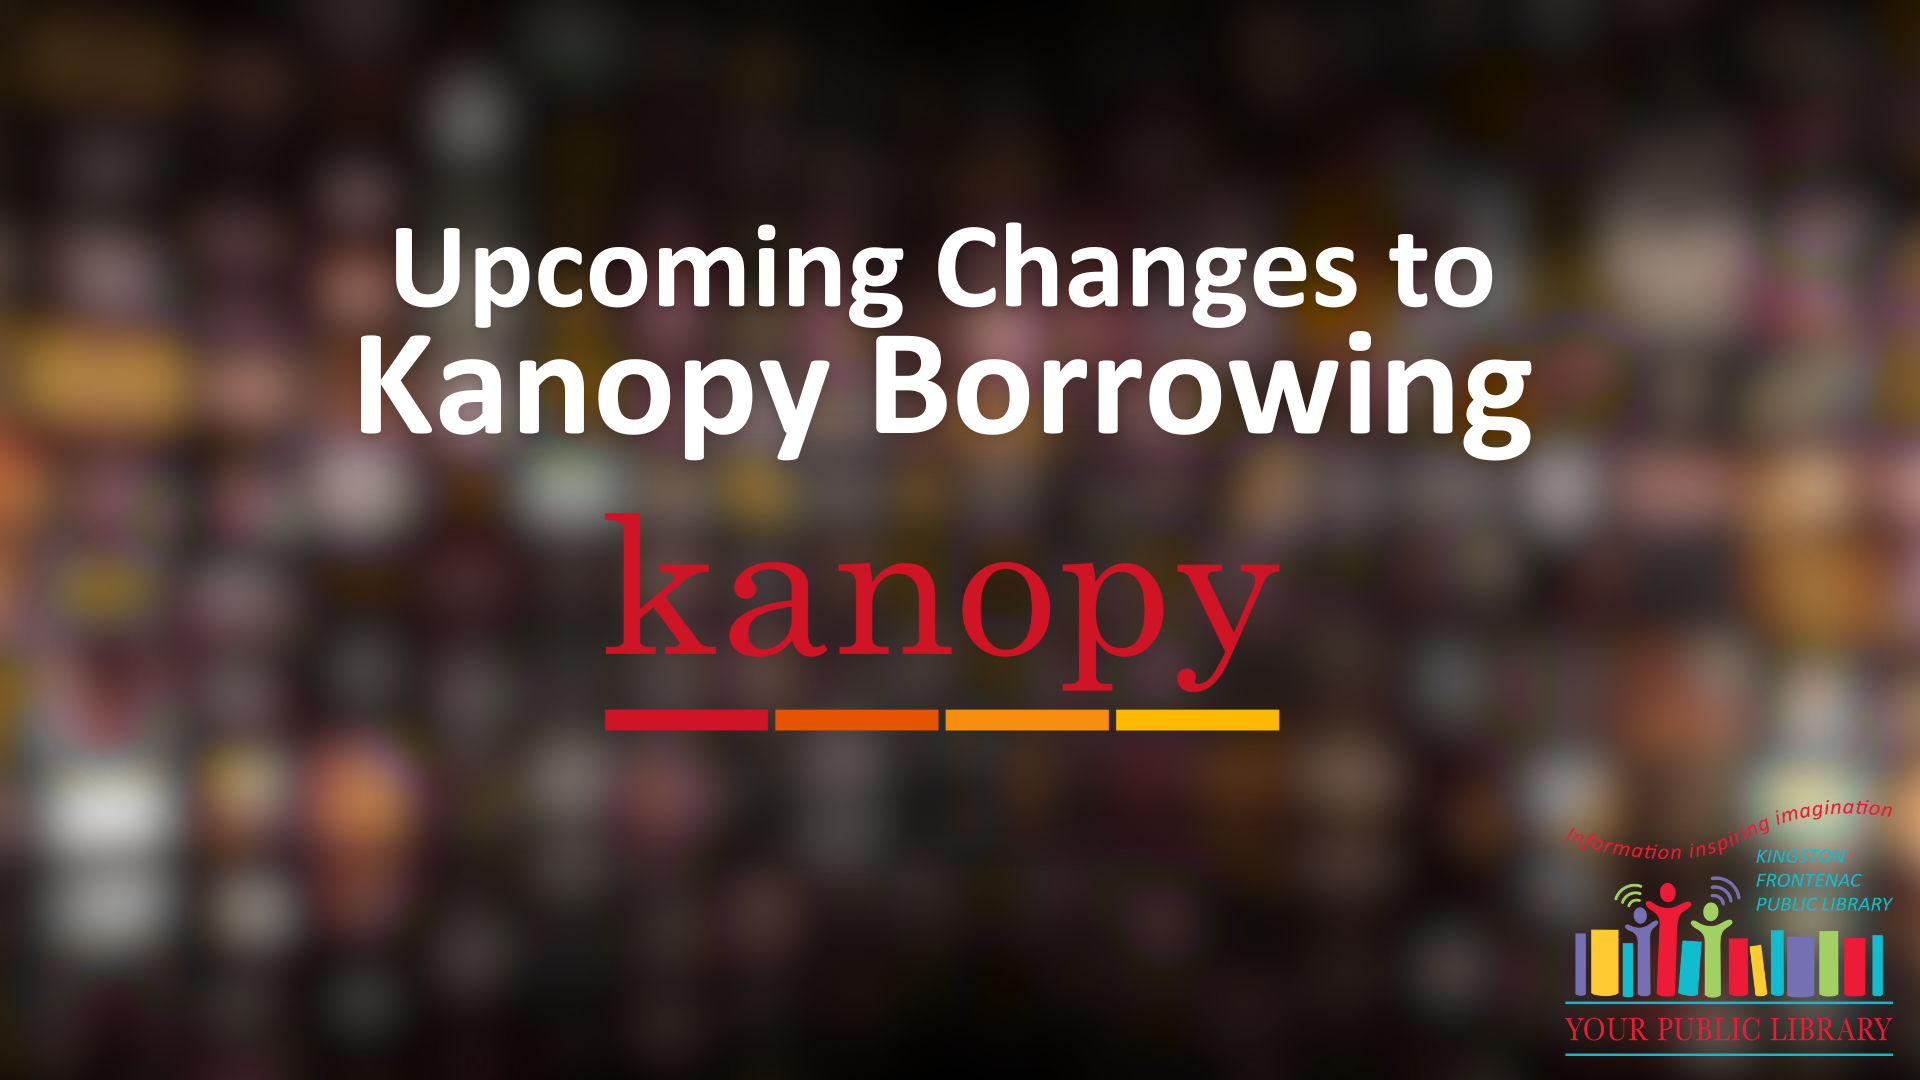 Text reading Upcoming Changes to Kanopy Borrowing against a collage of screens.